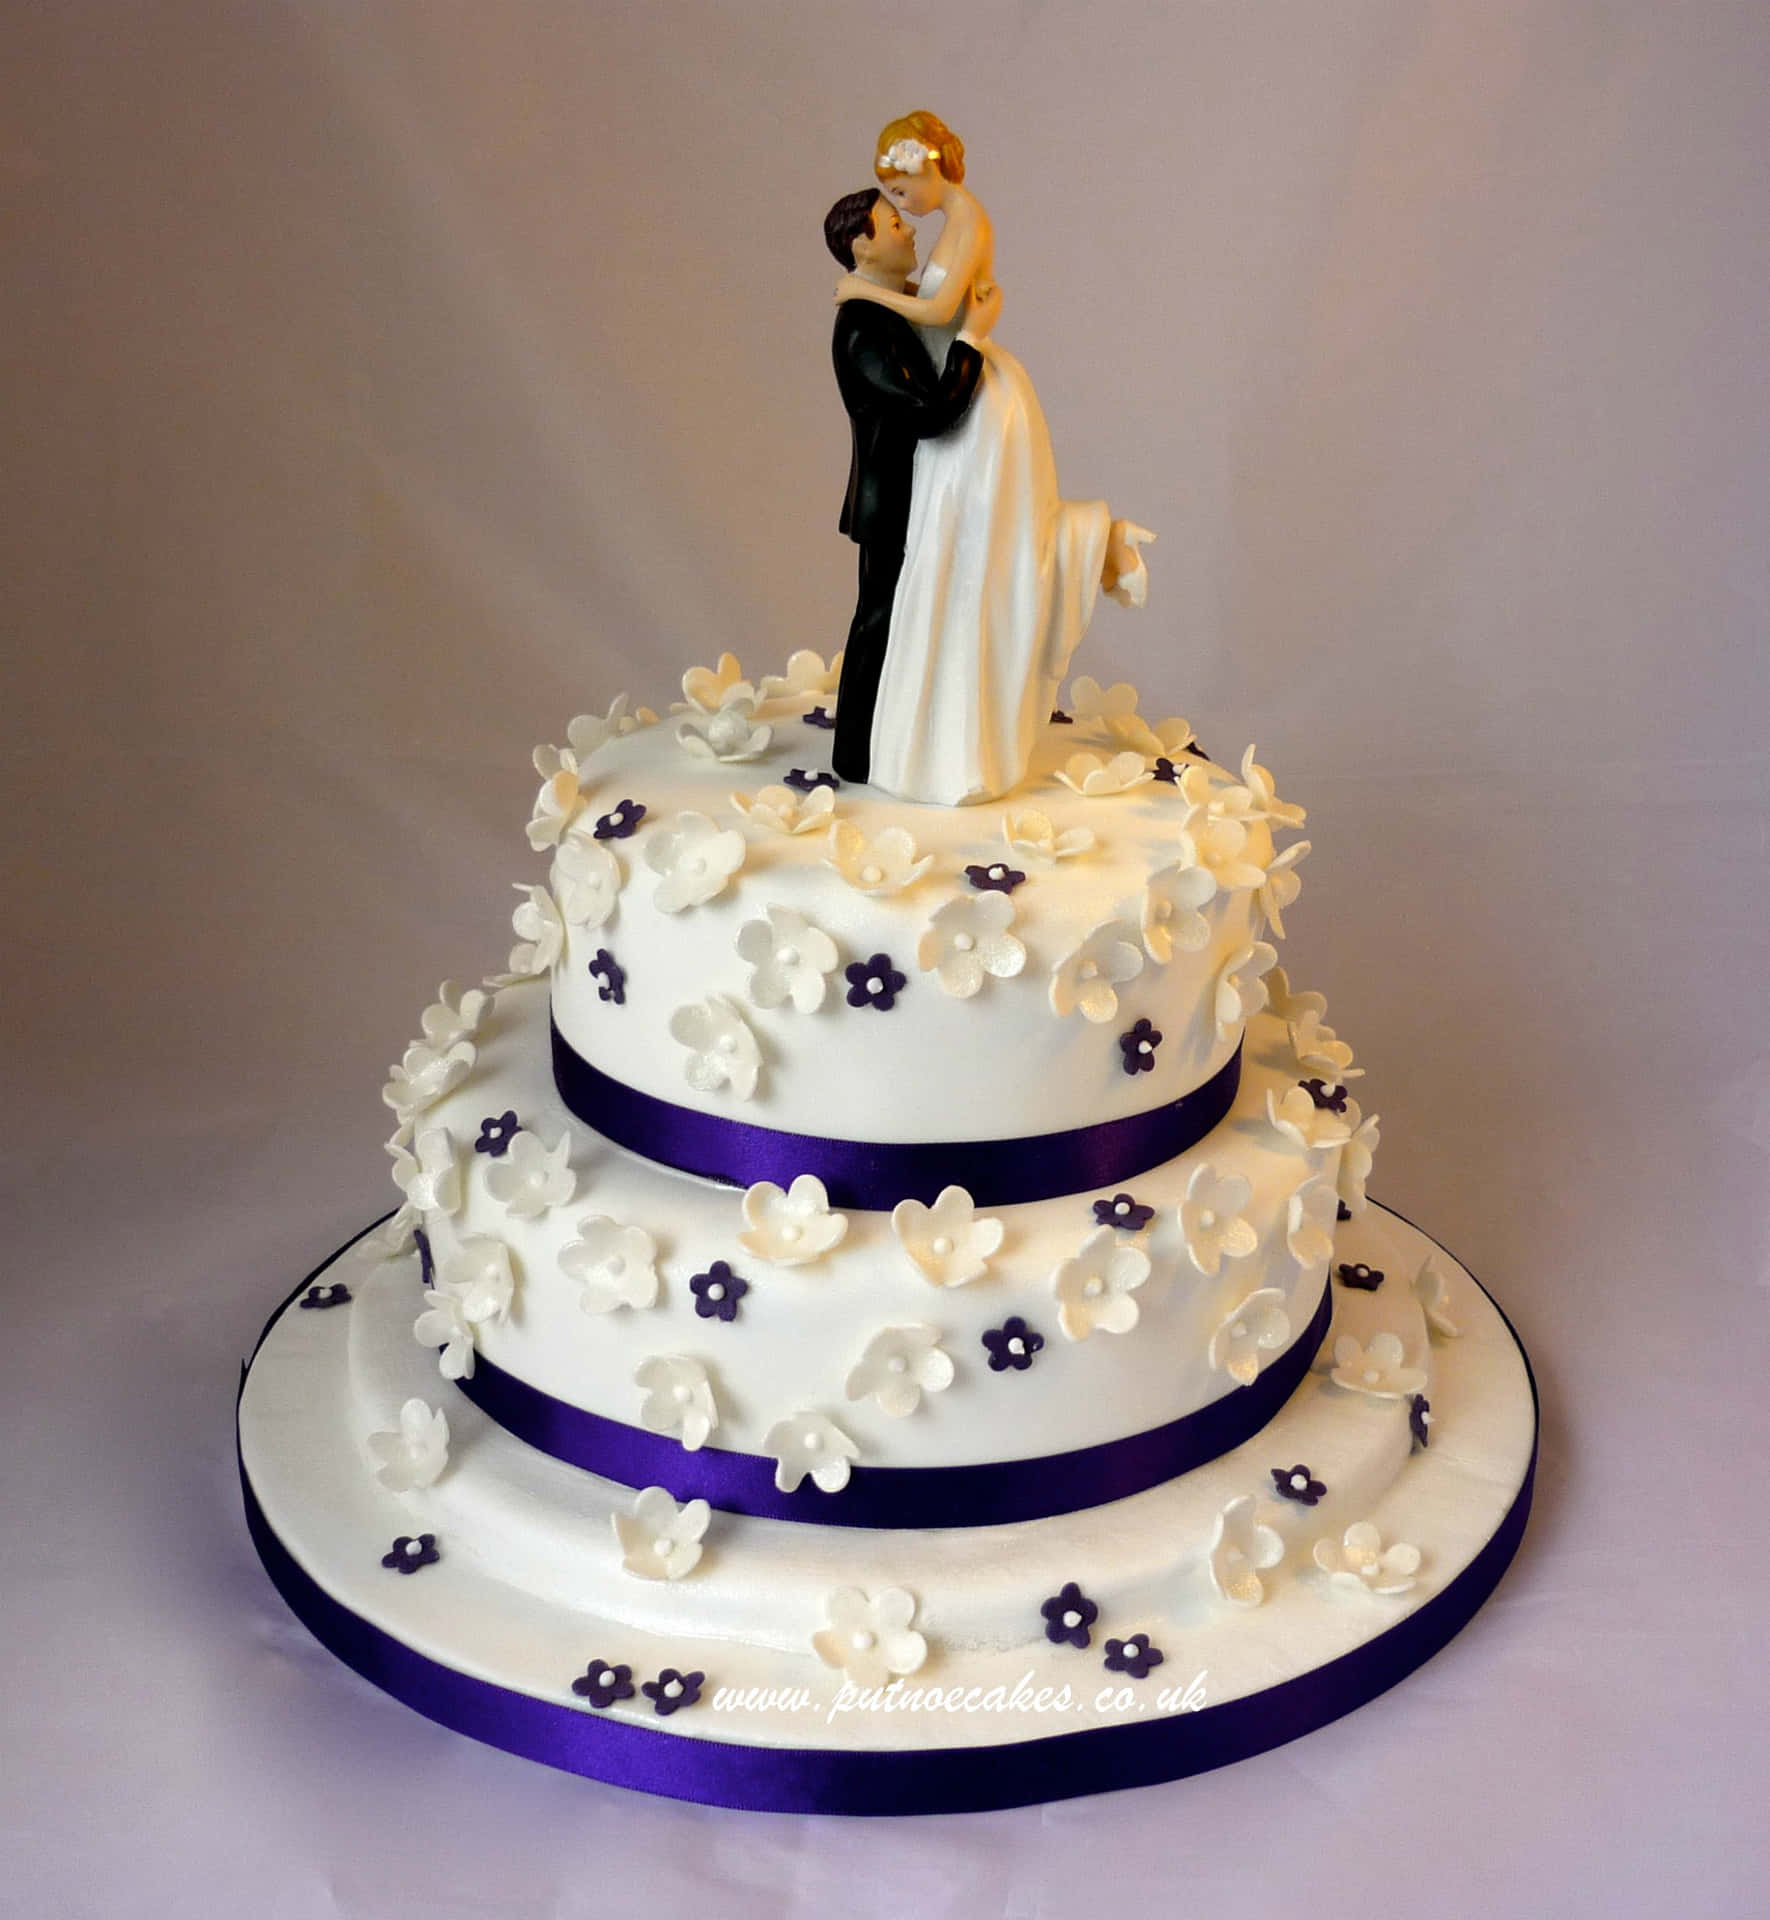 This beautiful tiered wedding cake is the perfect addition to any wedding celebration.